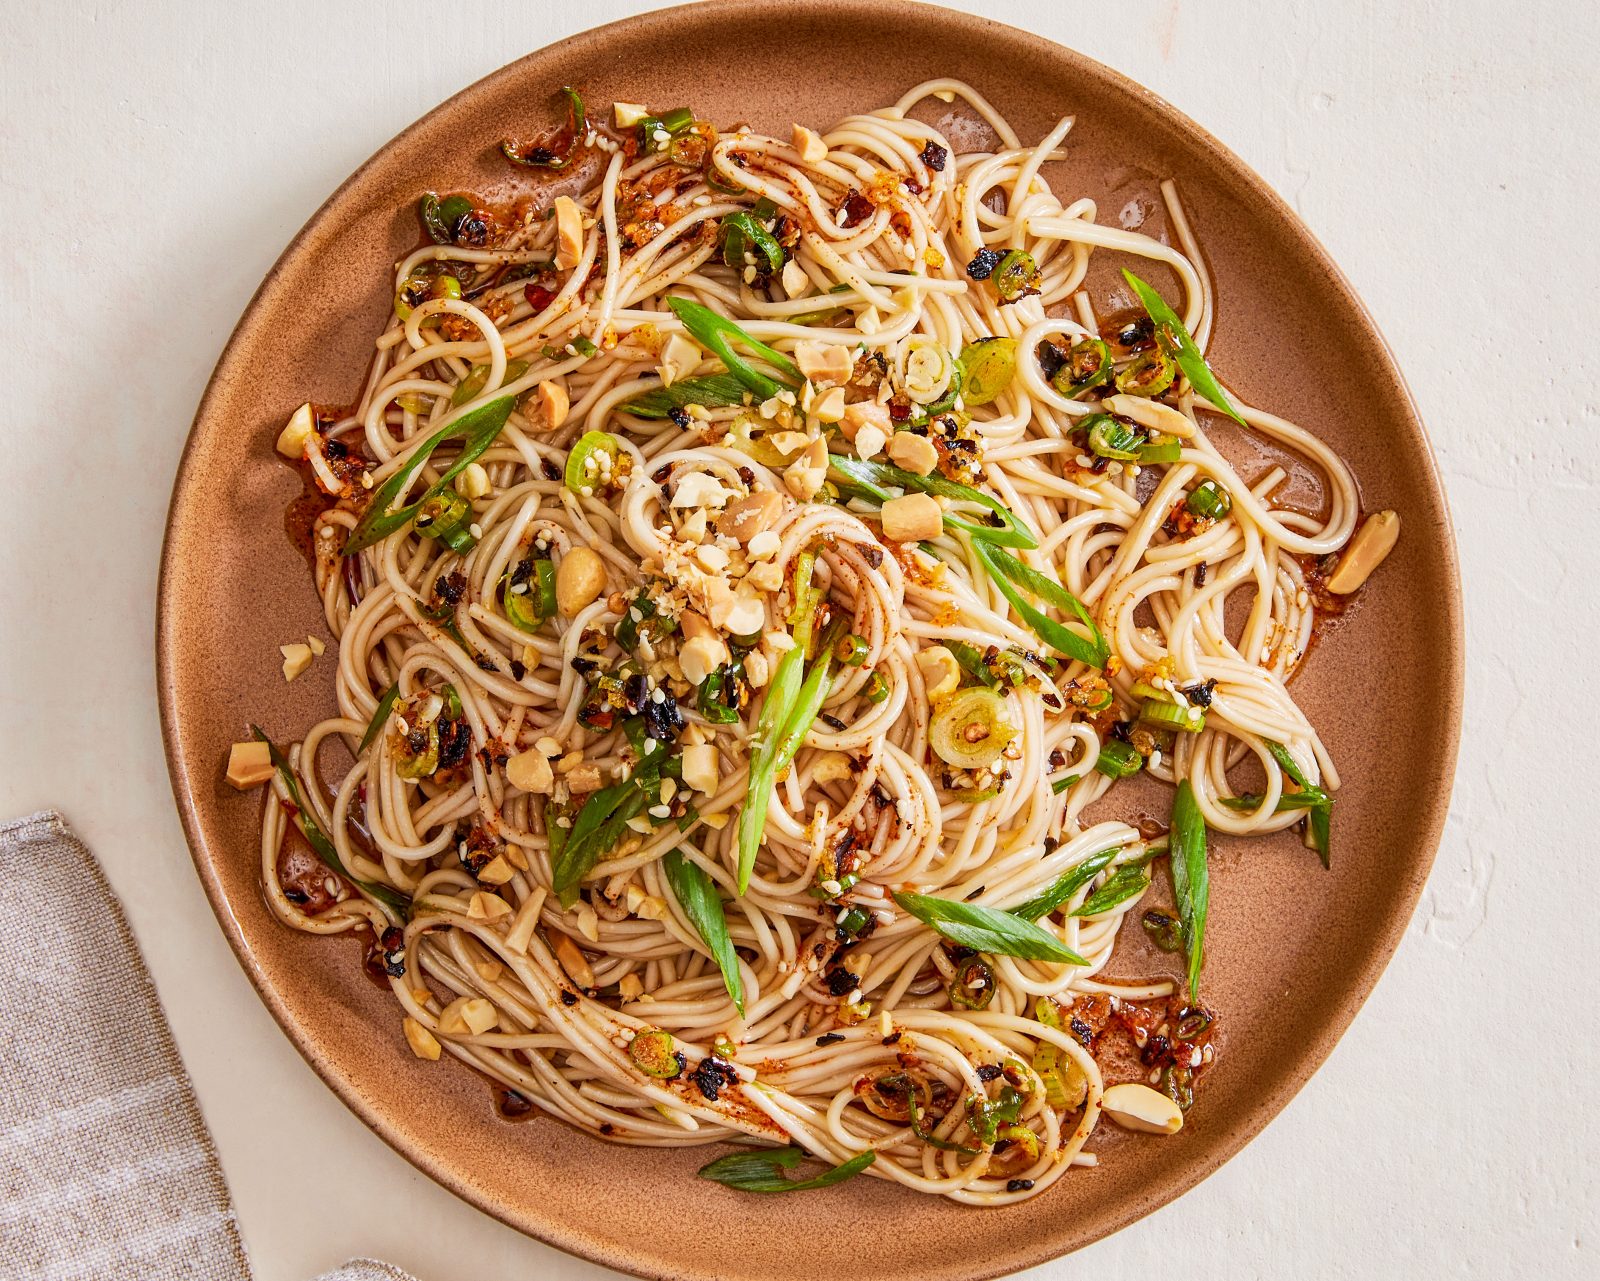 Sizzled Oil Oyster Sauce Noodles